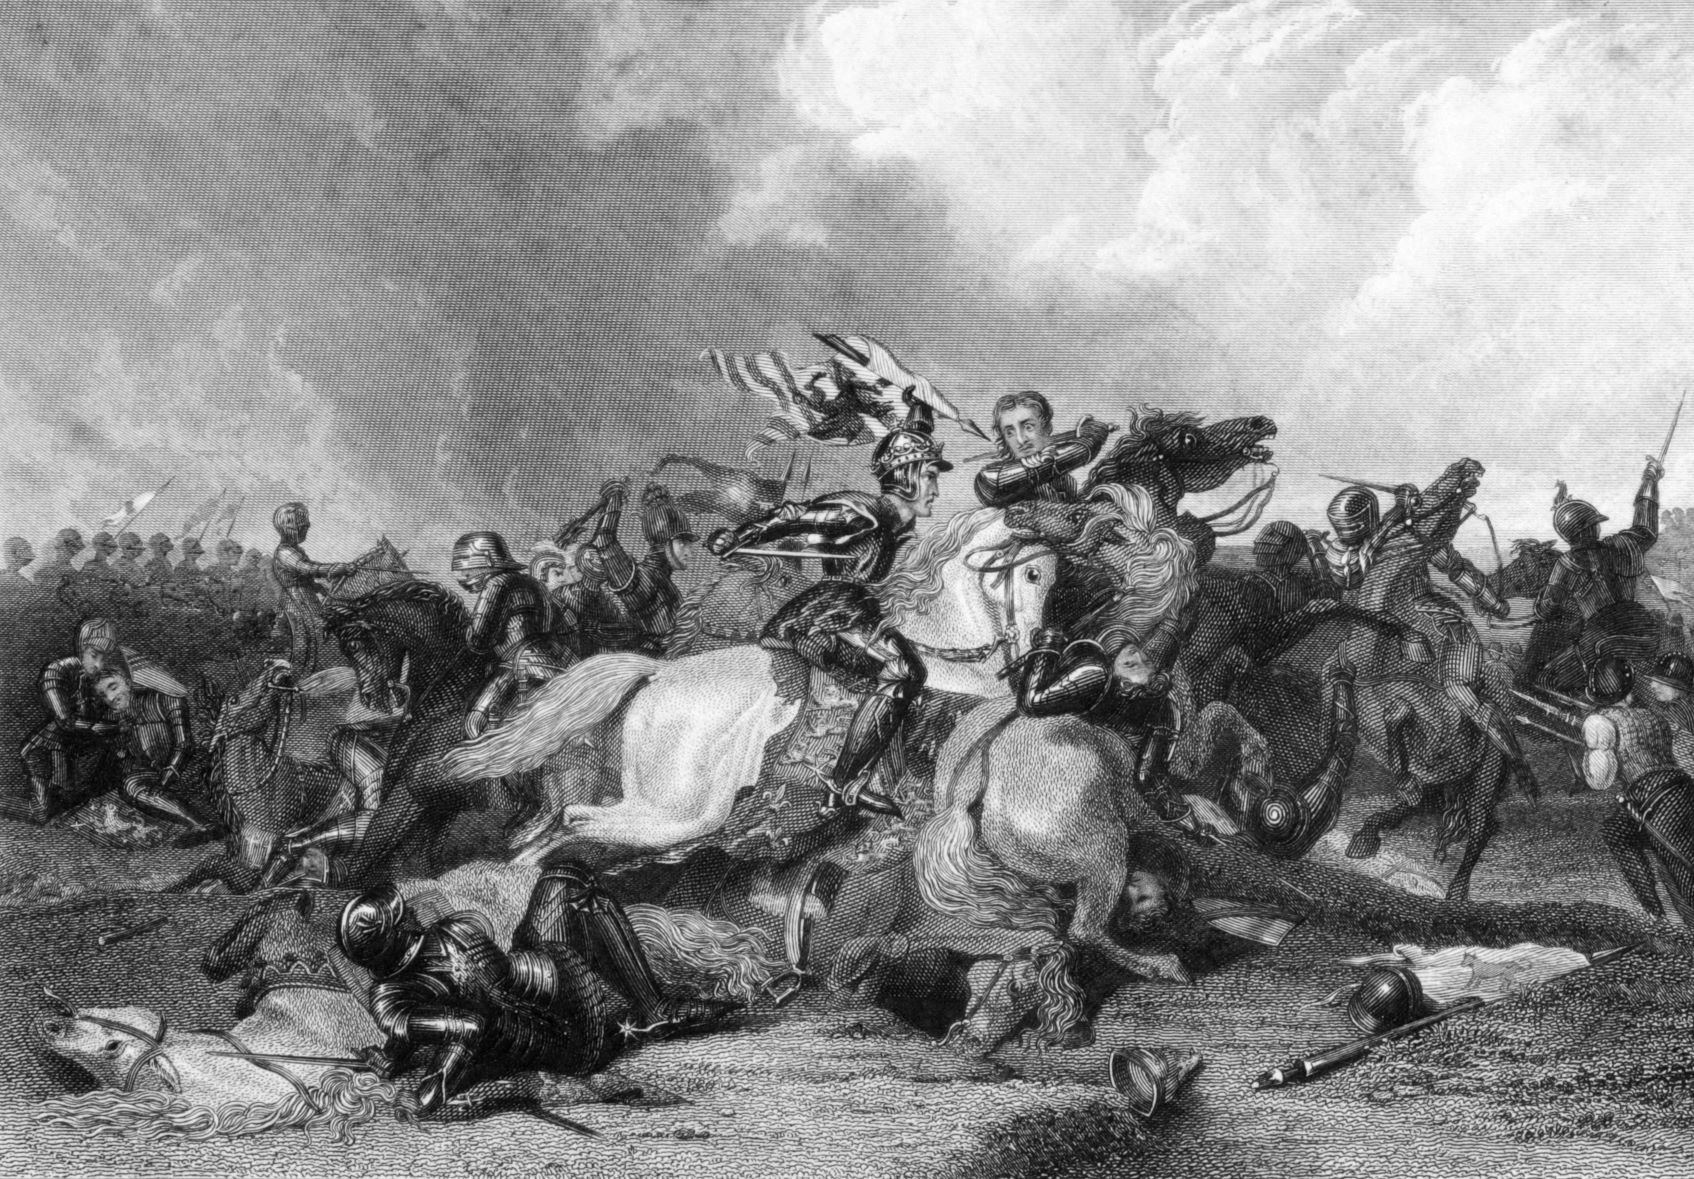 Richard III at the Battle of Bosworth